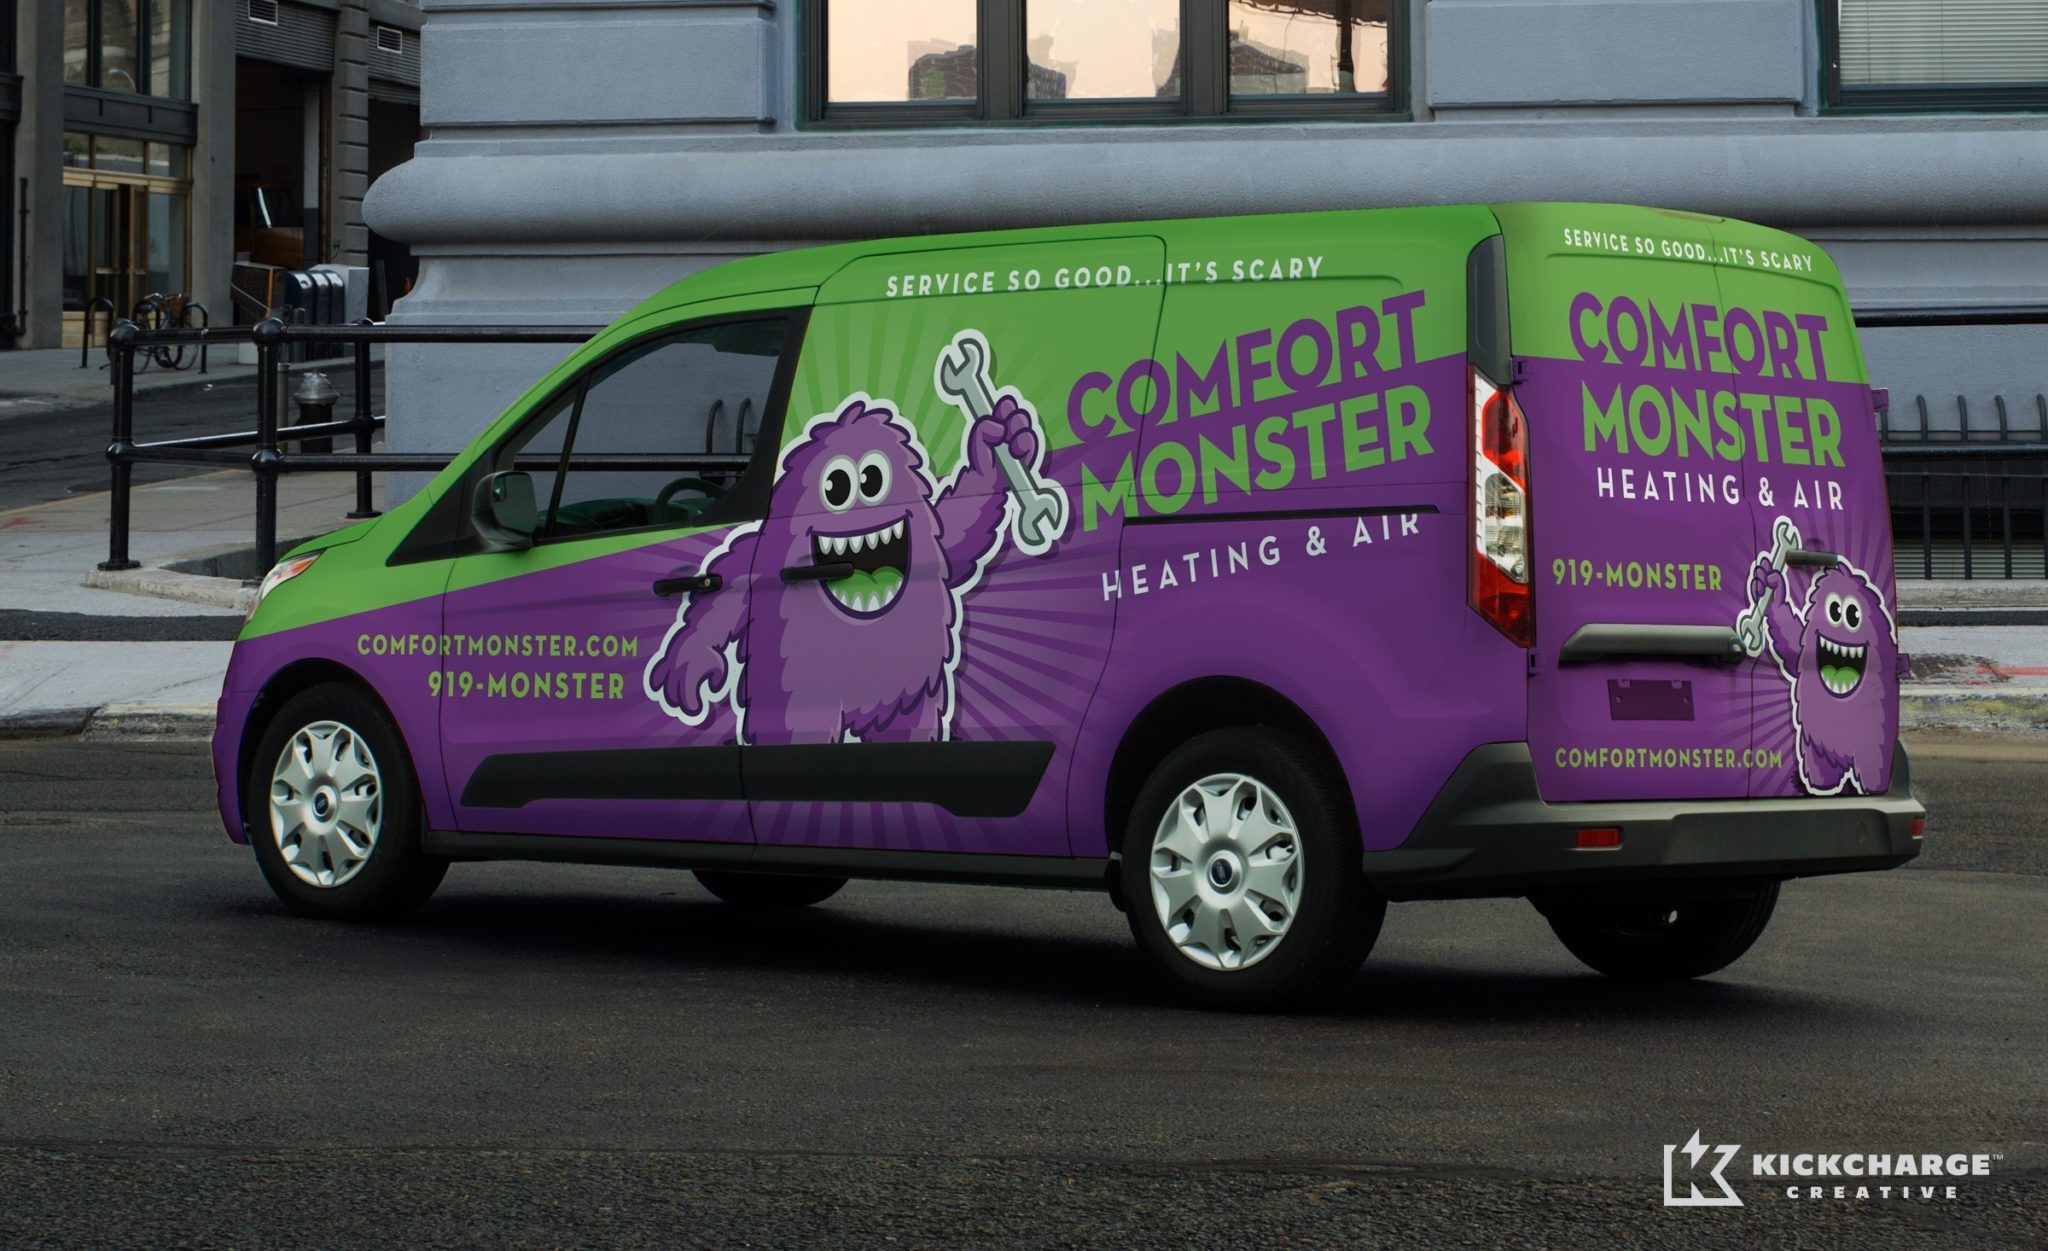 The best vehicle wraps use simple, easy-to-read graphics to evoke a strong brand promise to customers, as this wrap for Comfort Monster shows.